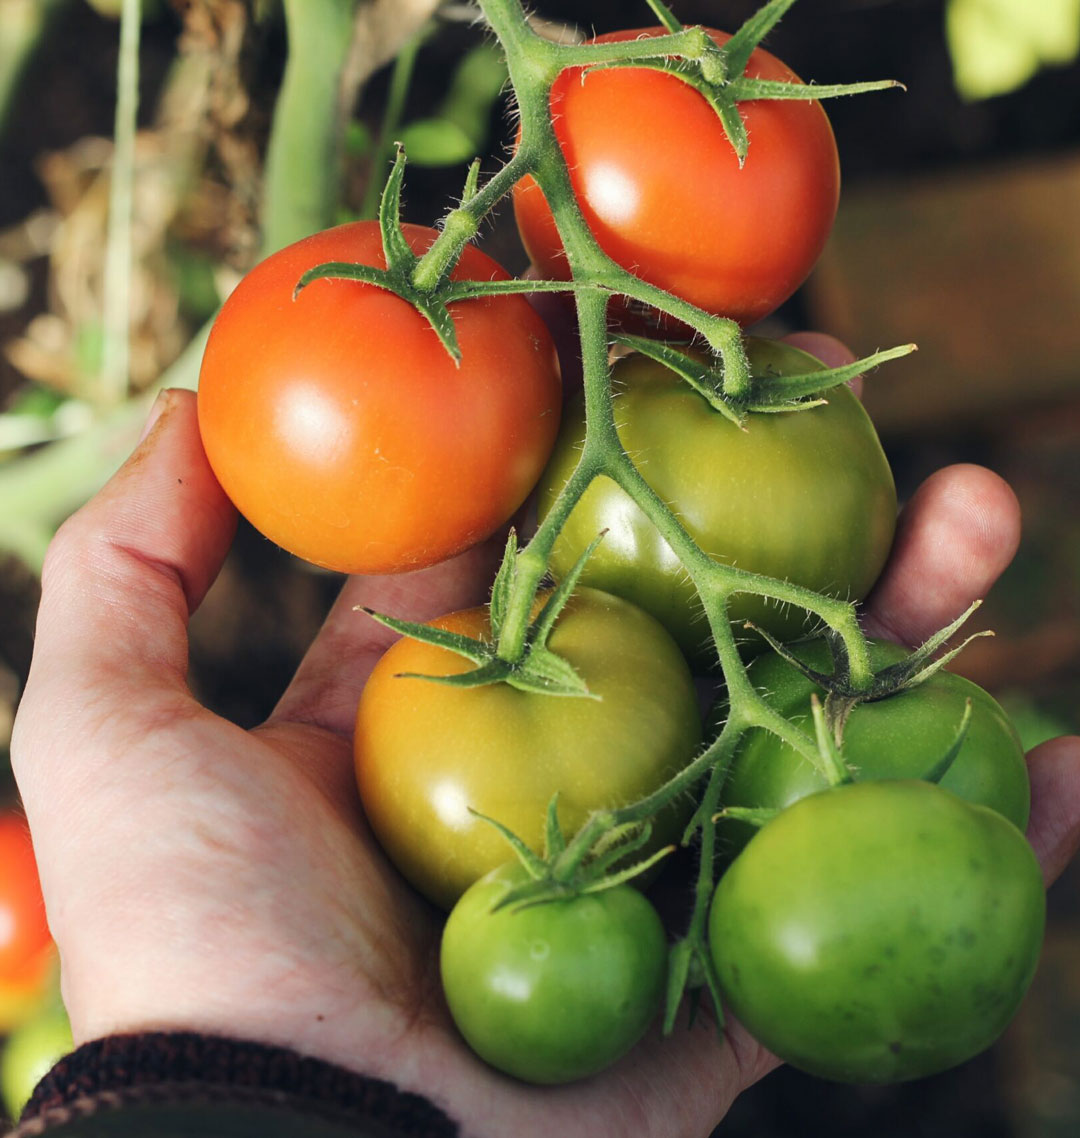 Growing tomatoes in Edmonton - Tips for Success